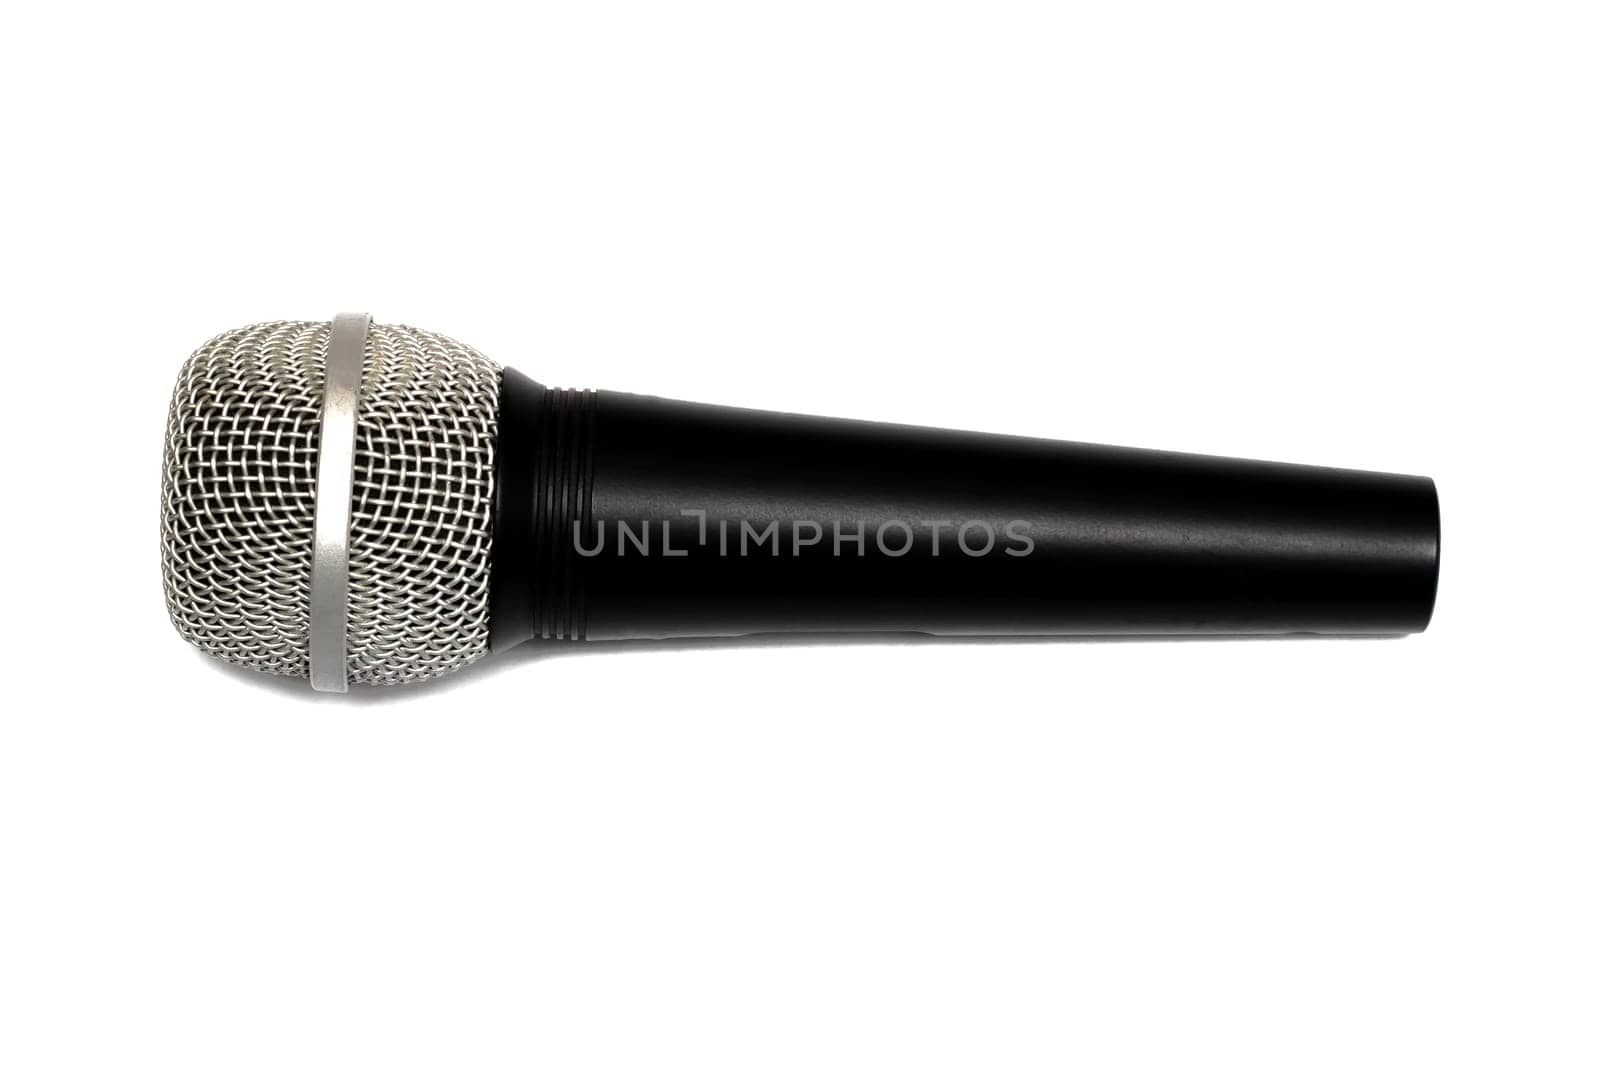 The Black microphone close up, isolate on a white background